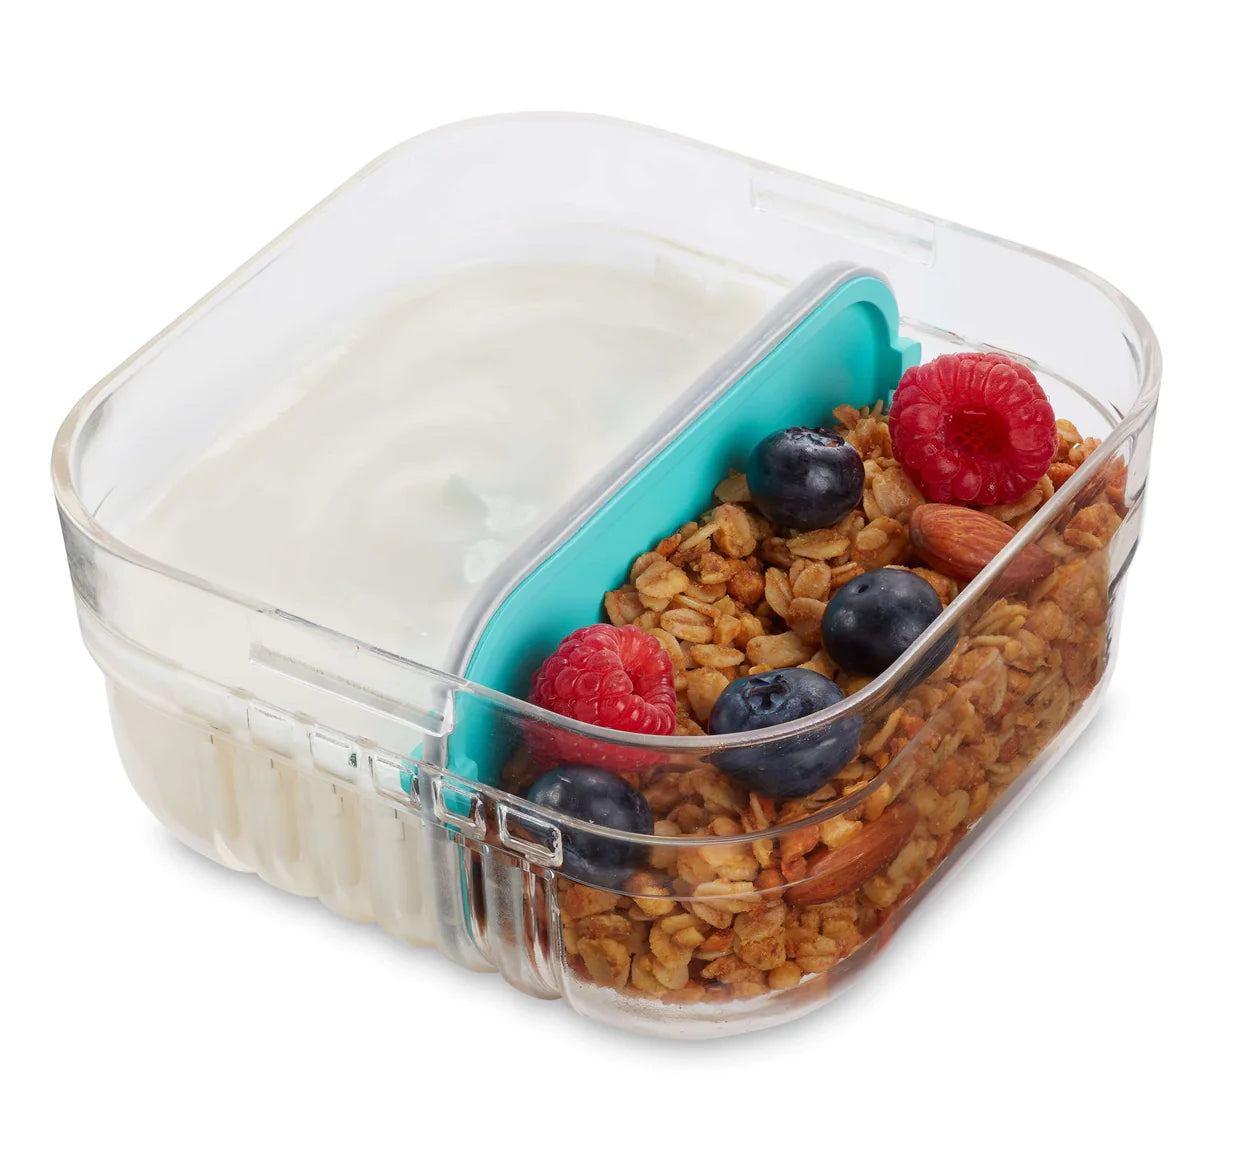 ERGO Bento Snack Container | Buy at The Green Collective